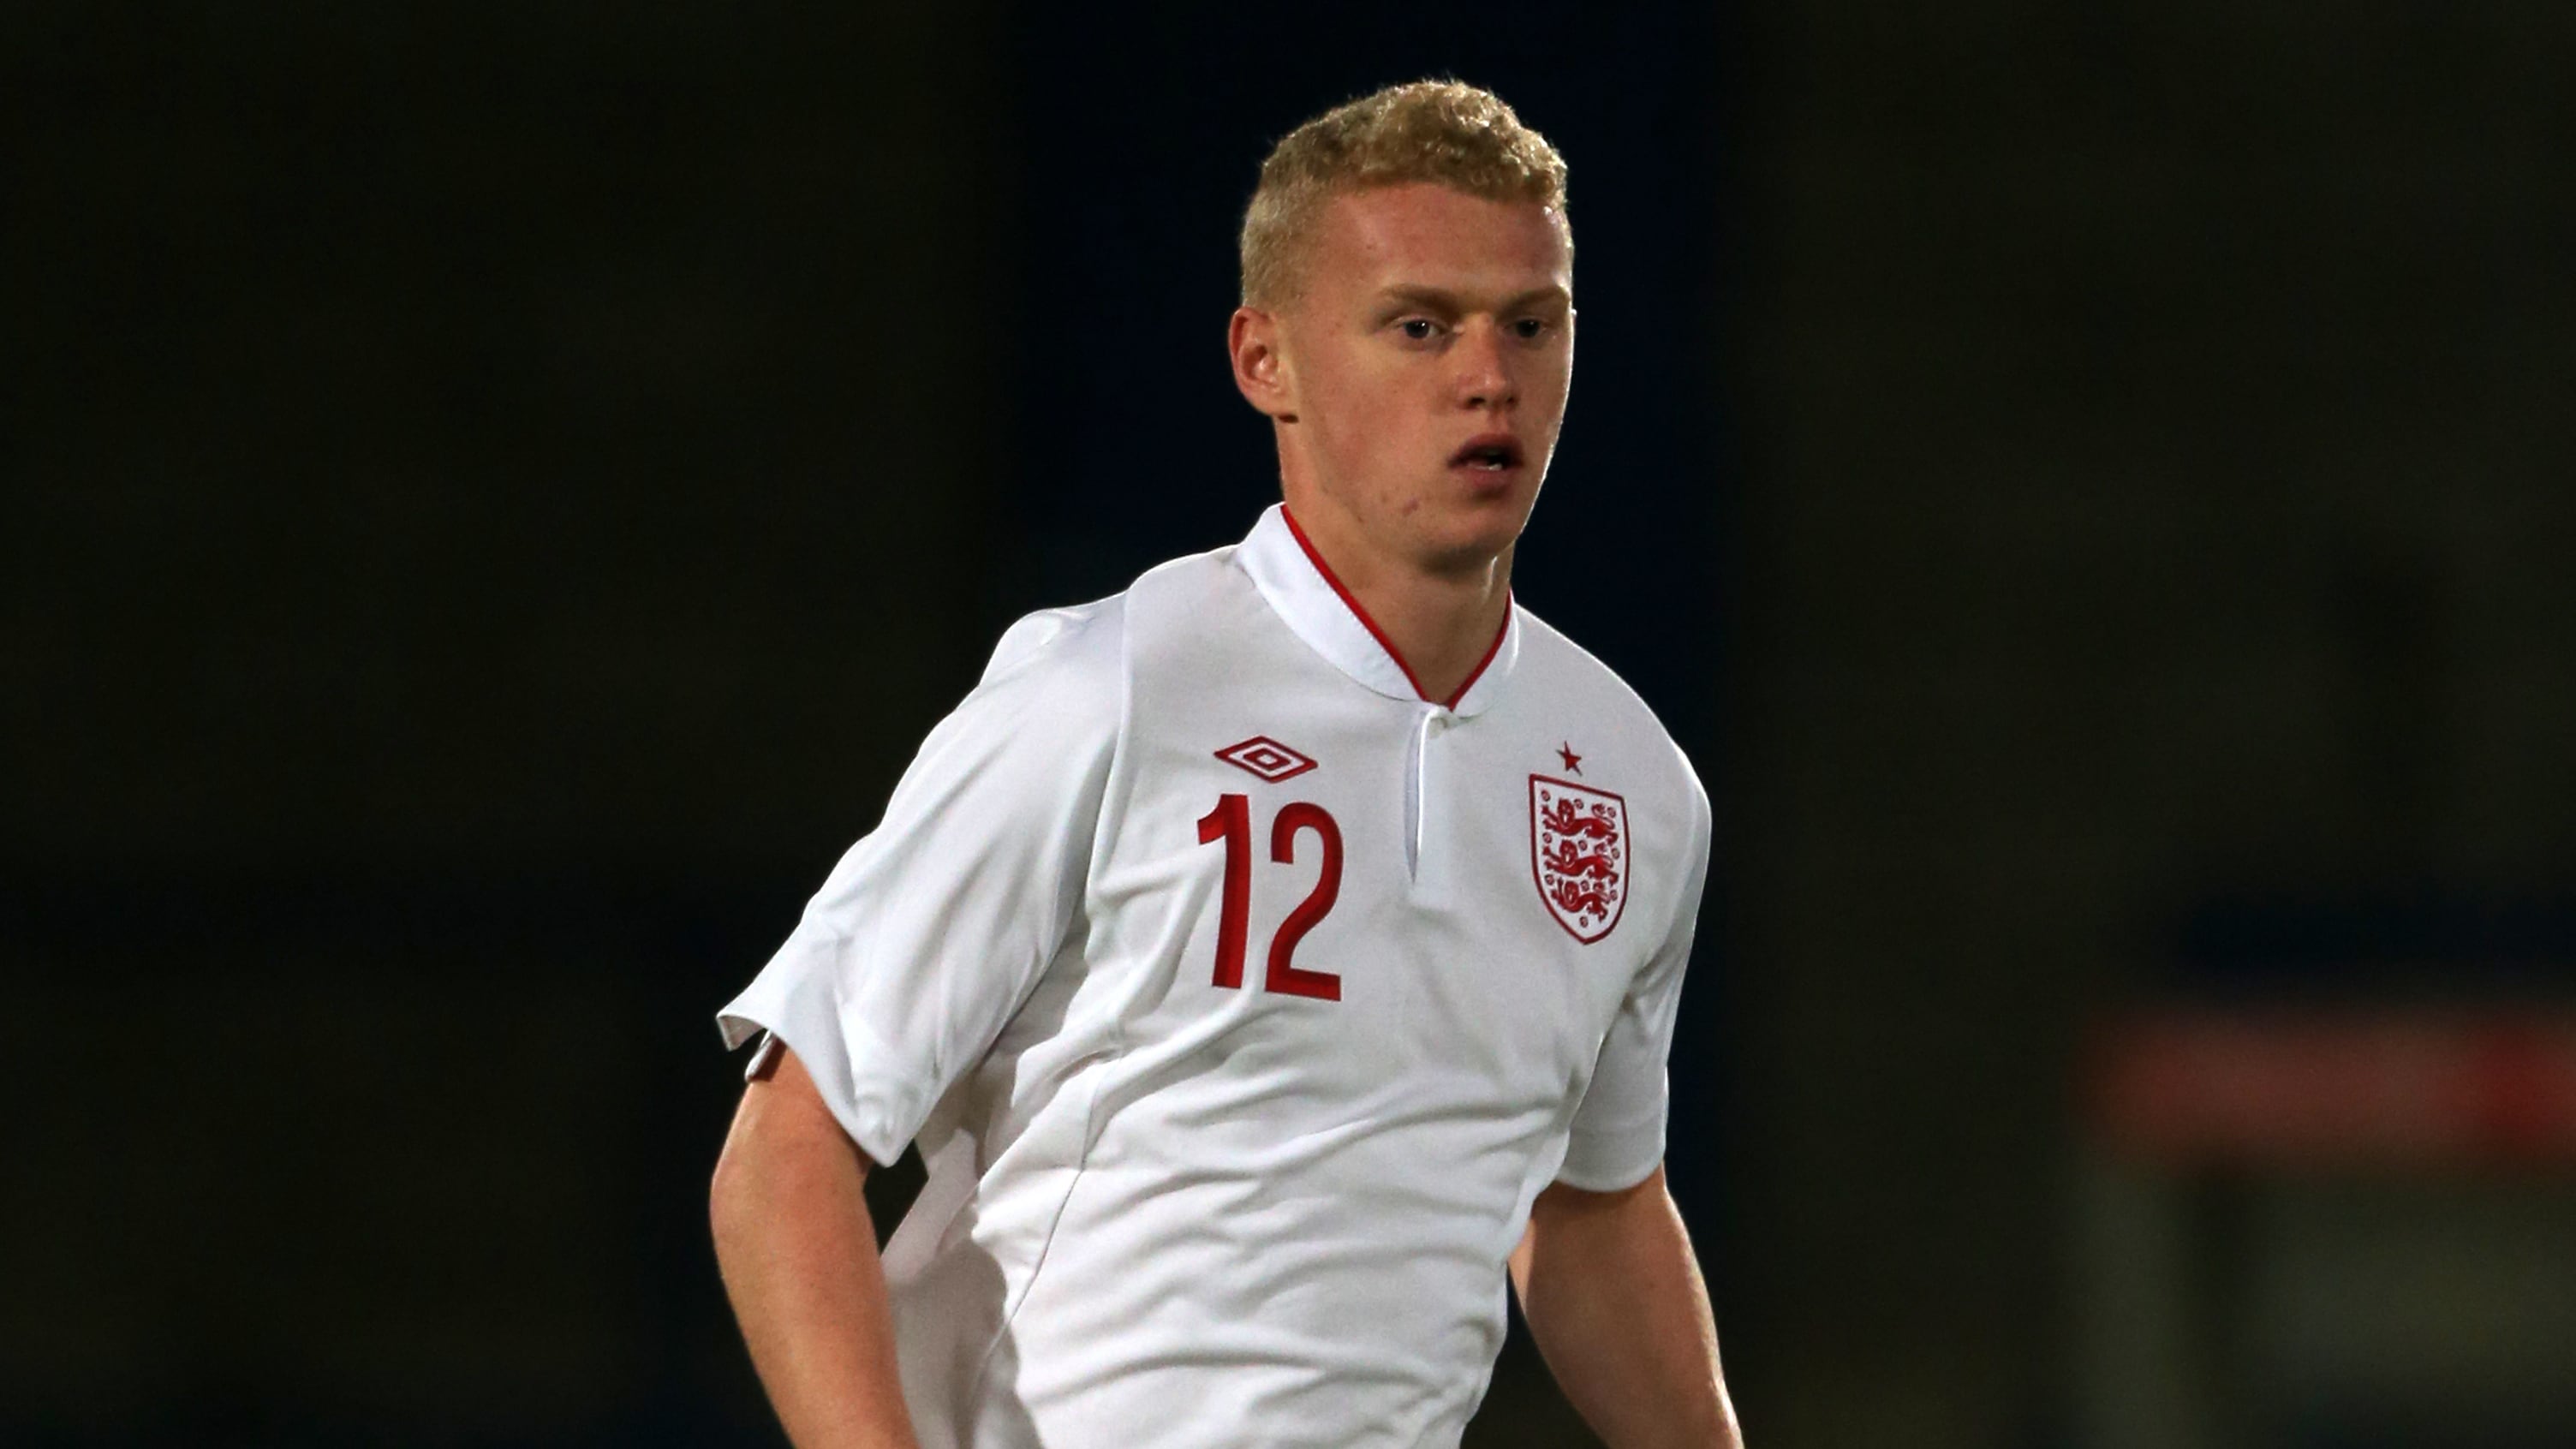 Former England youth international James Weir ended his career in Slovakia